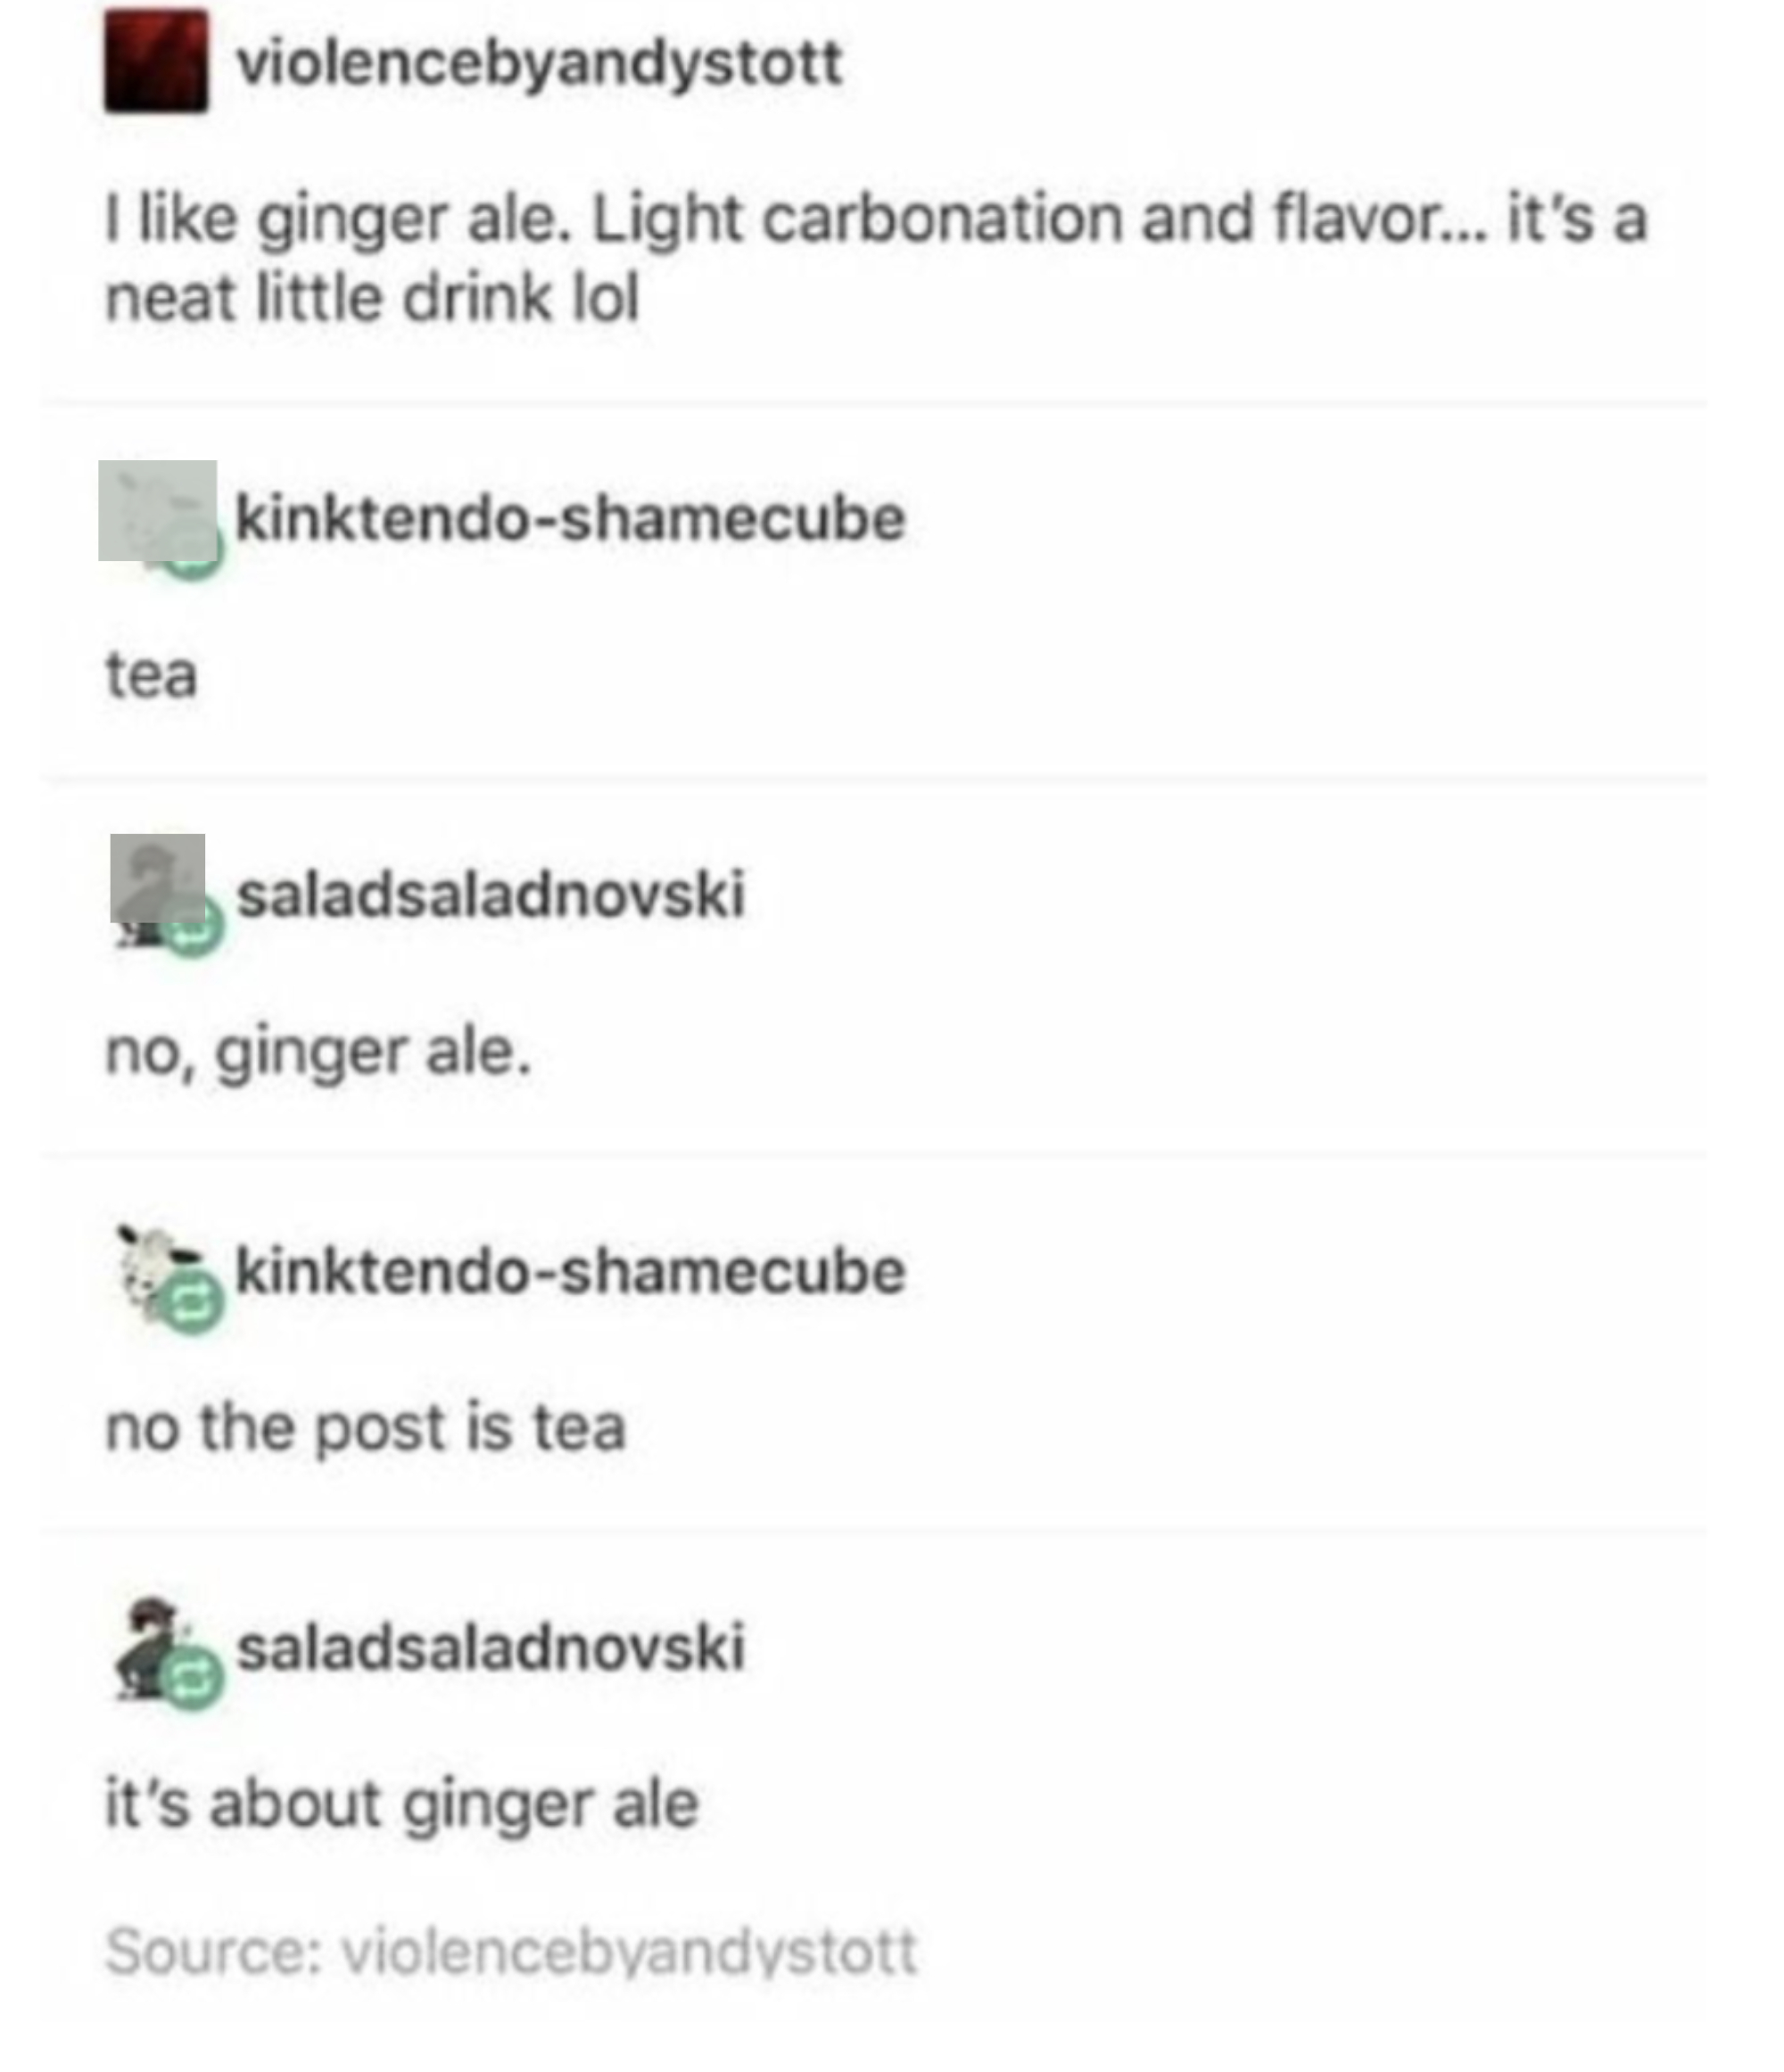 &quot;I like ginger ale, light carbonation and flavor — it&#x27;s a neat little drink lol,&quot; &quot;tea,&quot; &quot;no, ginger ale,&quot; &quot;no, the post is tea,&quot; It&#x27;s about ginger ale&quot;